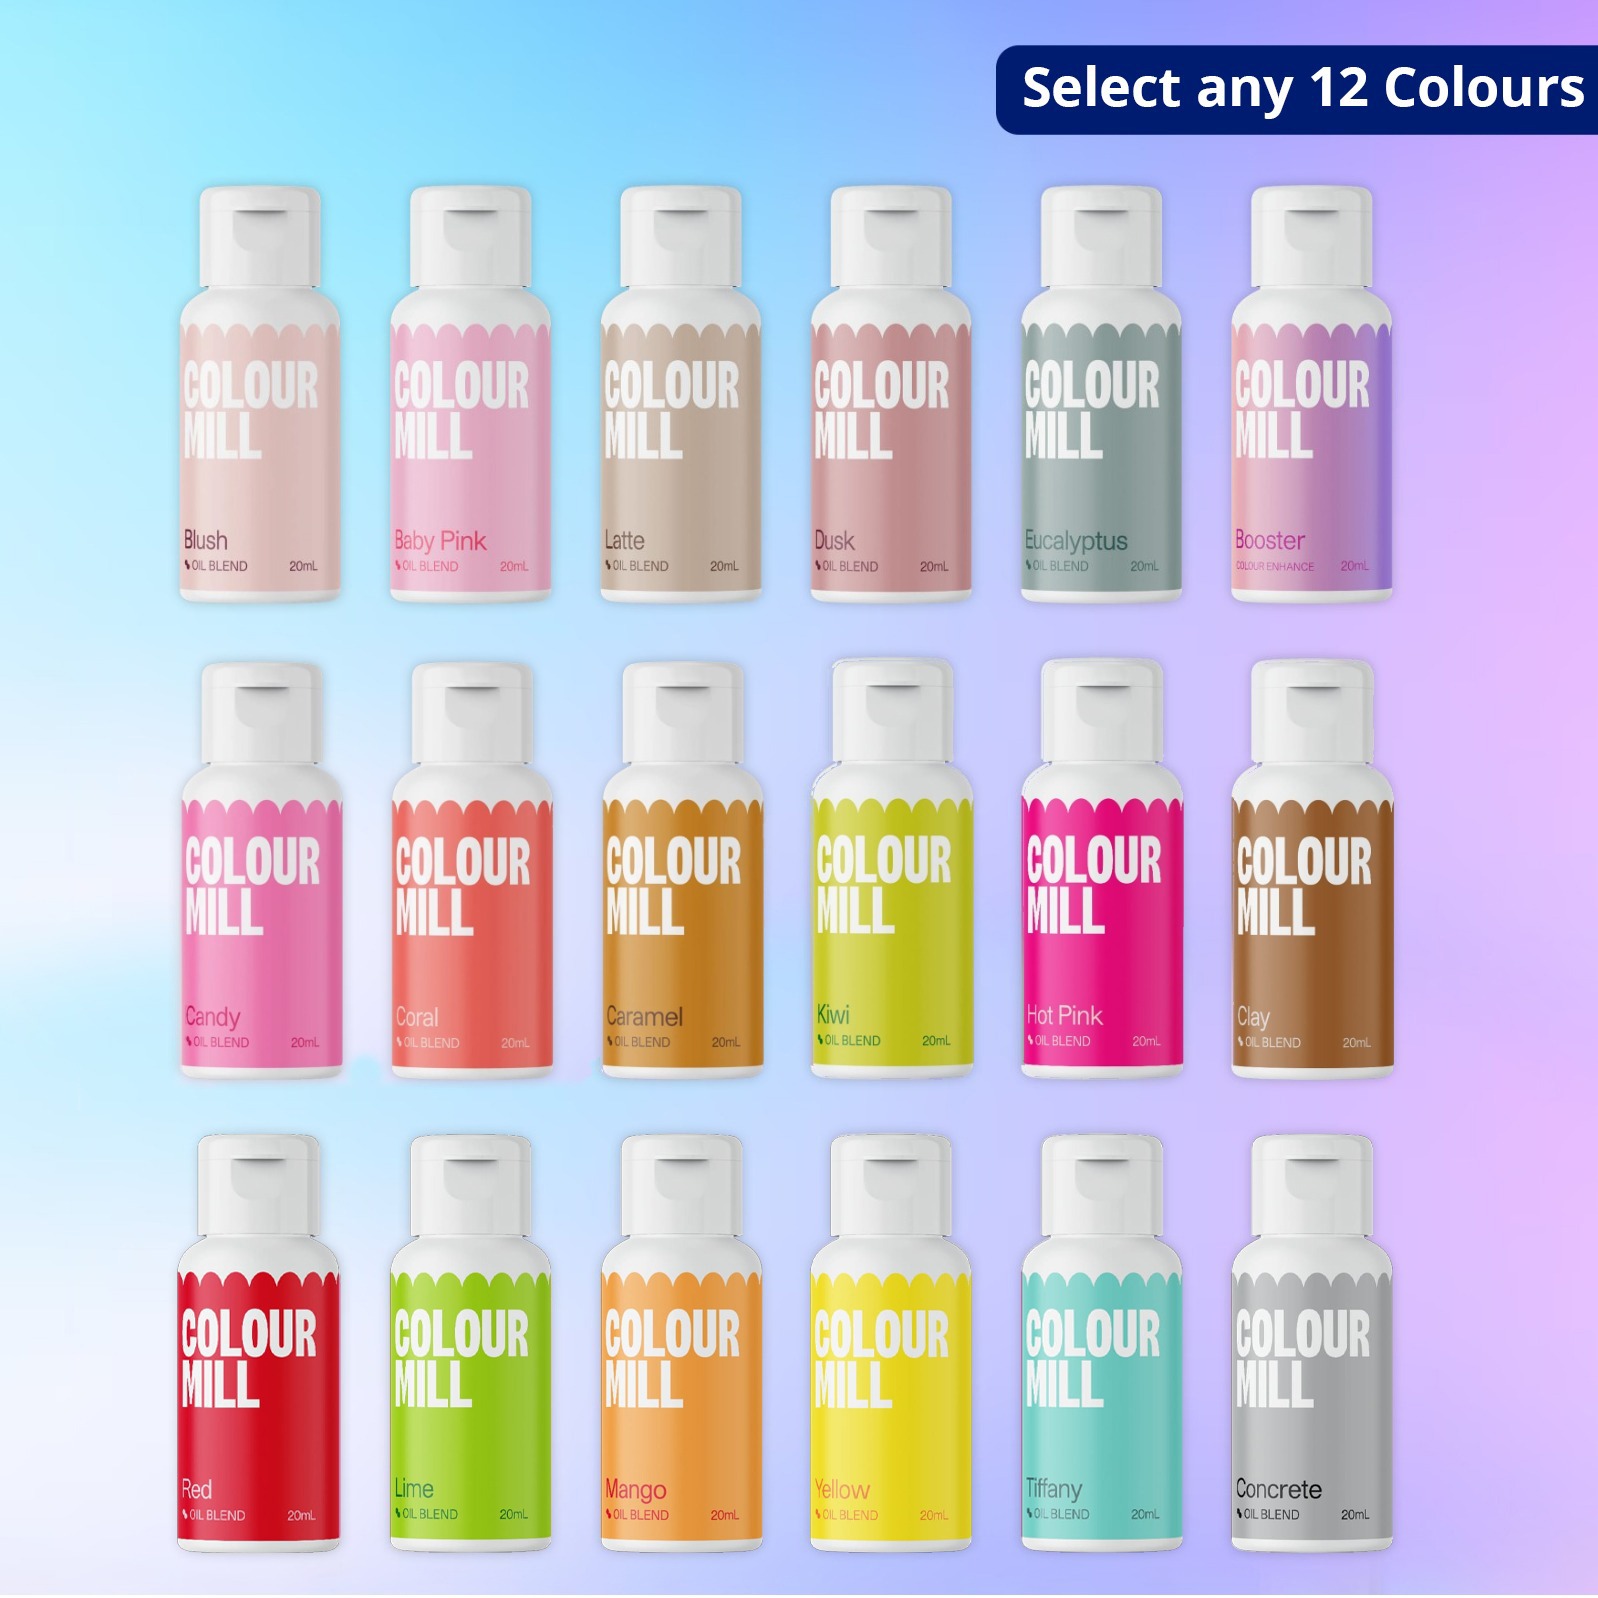 Select any 12 colours